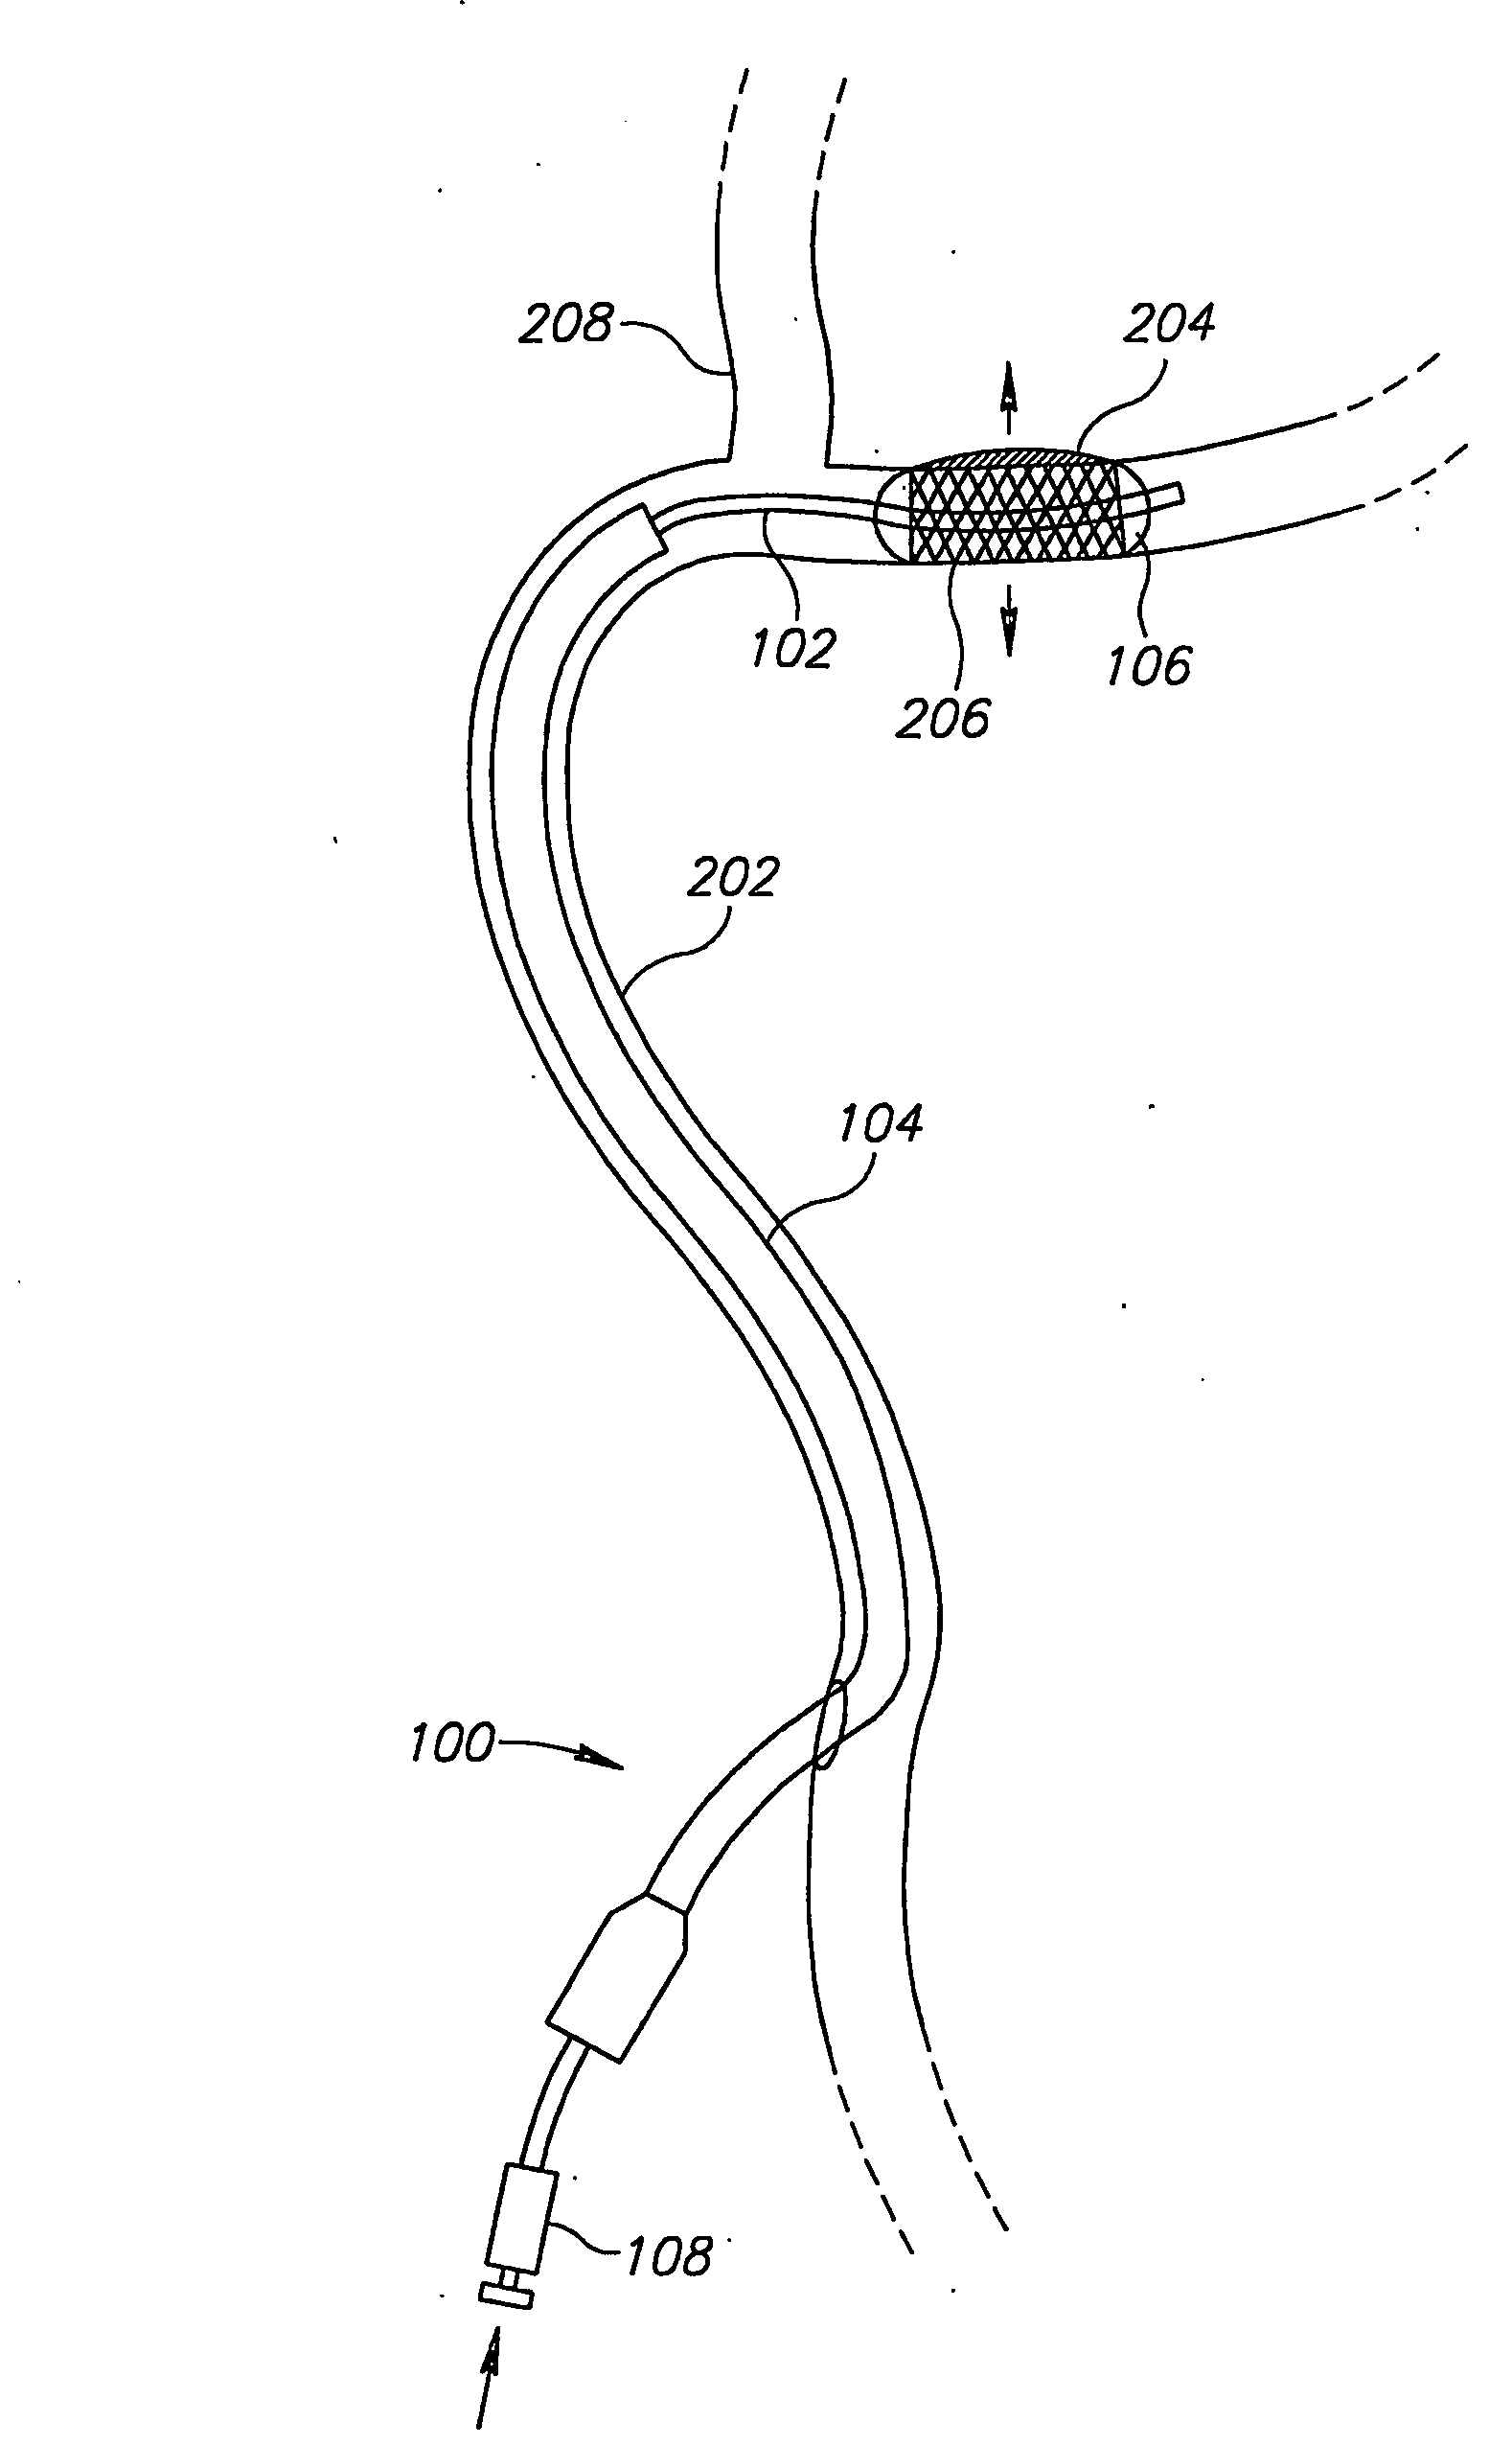 Stent Positioning Using Inflation Tube